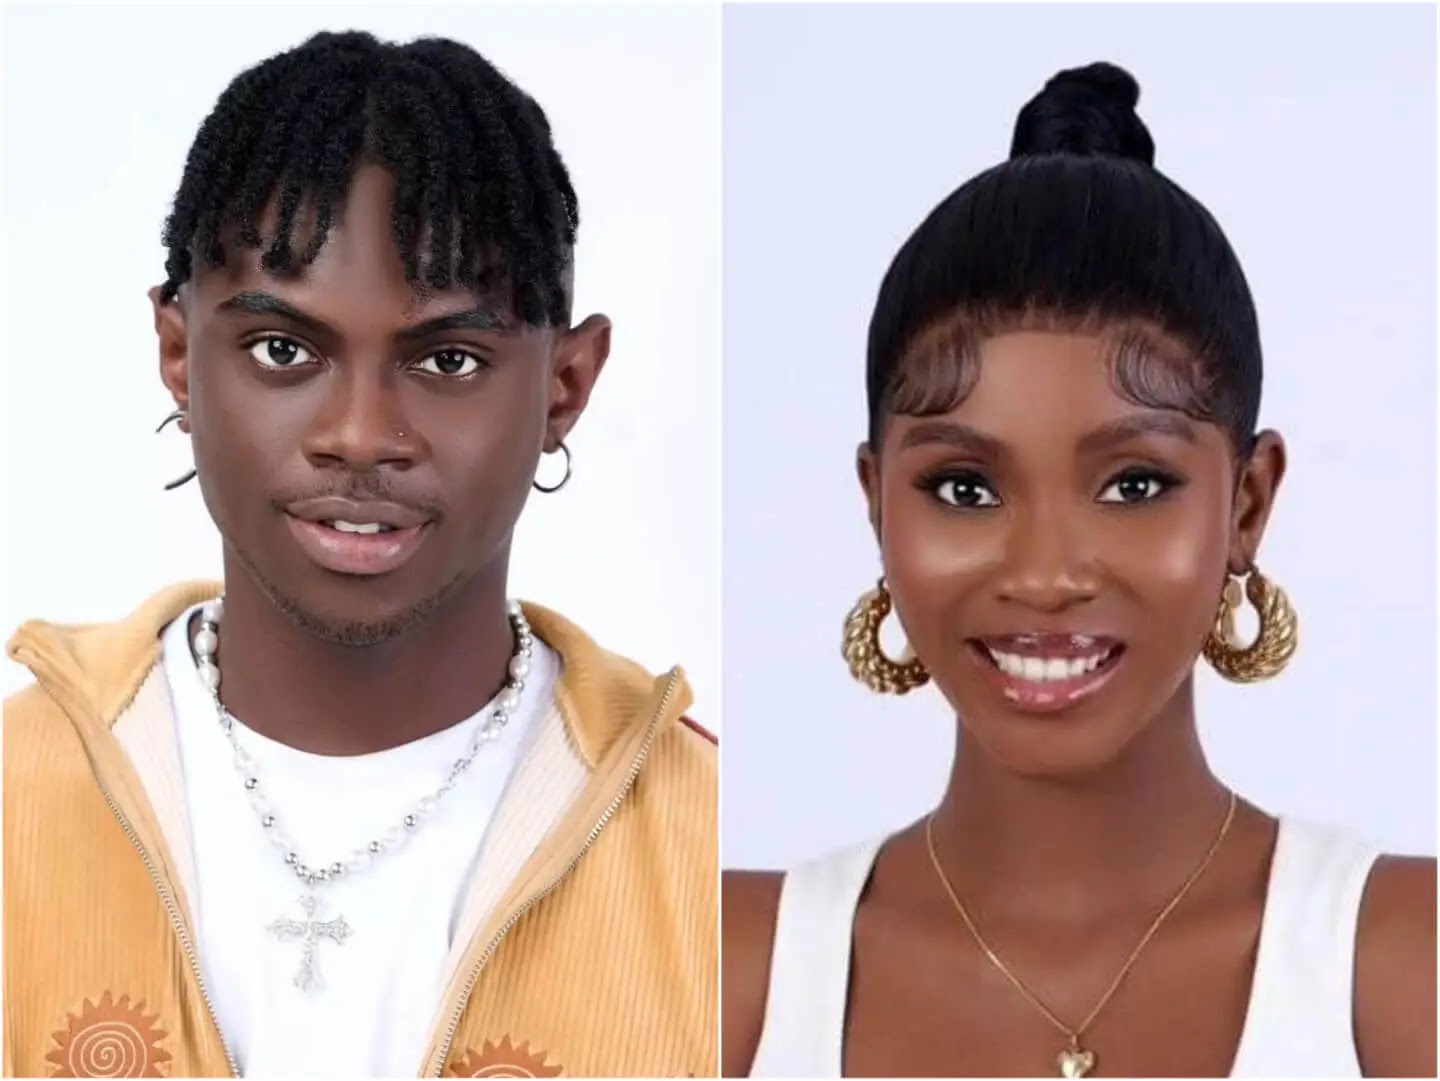 BBNaijaS7 Day 33: "Confused ship" Mixed reactions as Modella and Bryann get busy under the sheets. (Video)